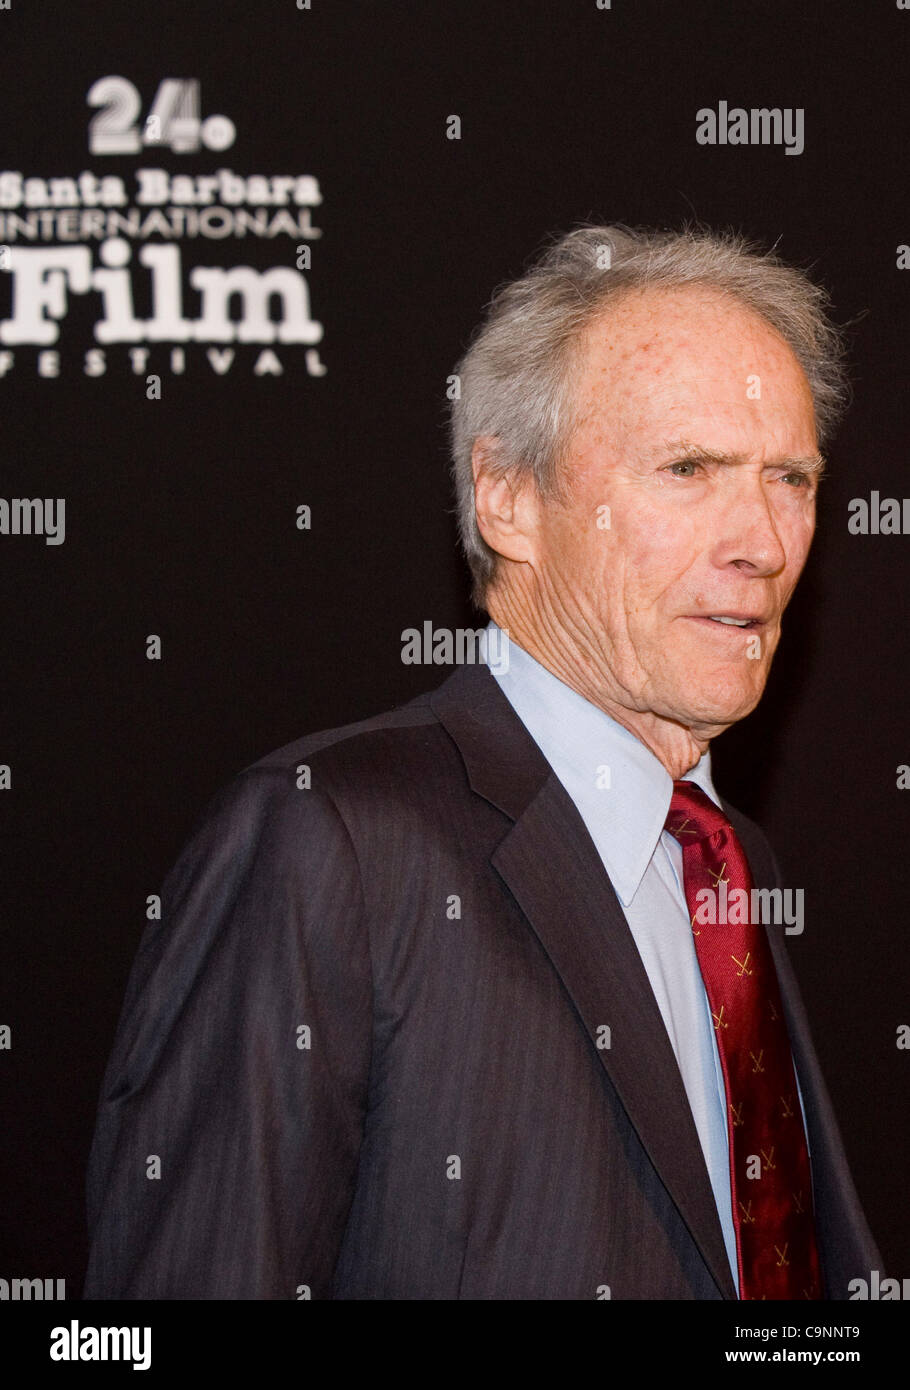 Jan 29, 2009 - Santa Barbara, California, USA - Veteran actor, director and producer CLINT EASTWOOD at the 24th Santa Barbara International Film Festival, where he received the festival's highest honor, the Modern Master Award. It was presented by former recipient Sean Penn. (Credit Image: © P.J. He Stock Photo